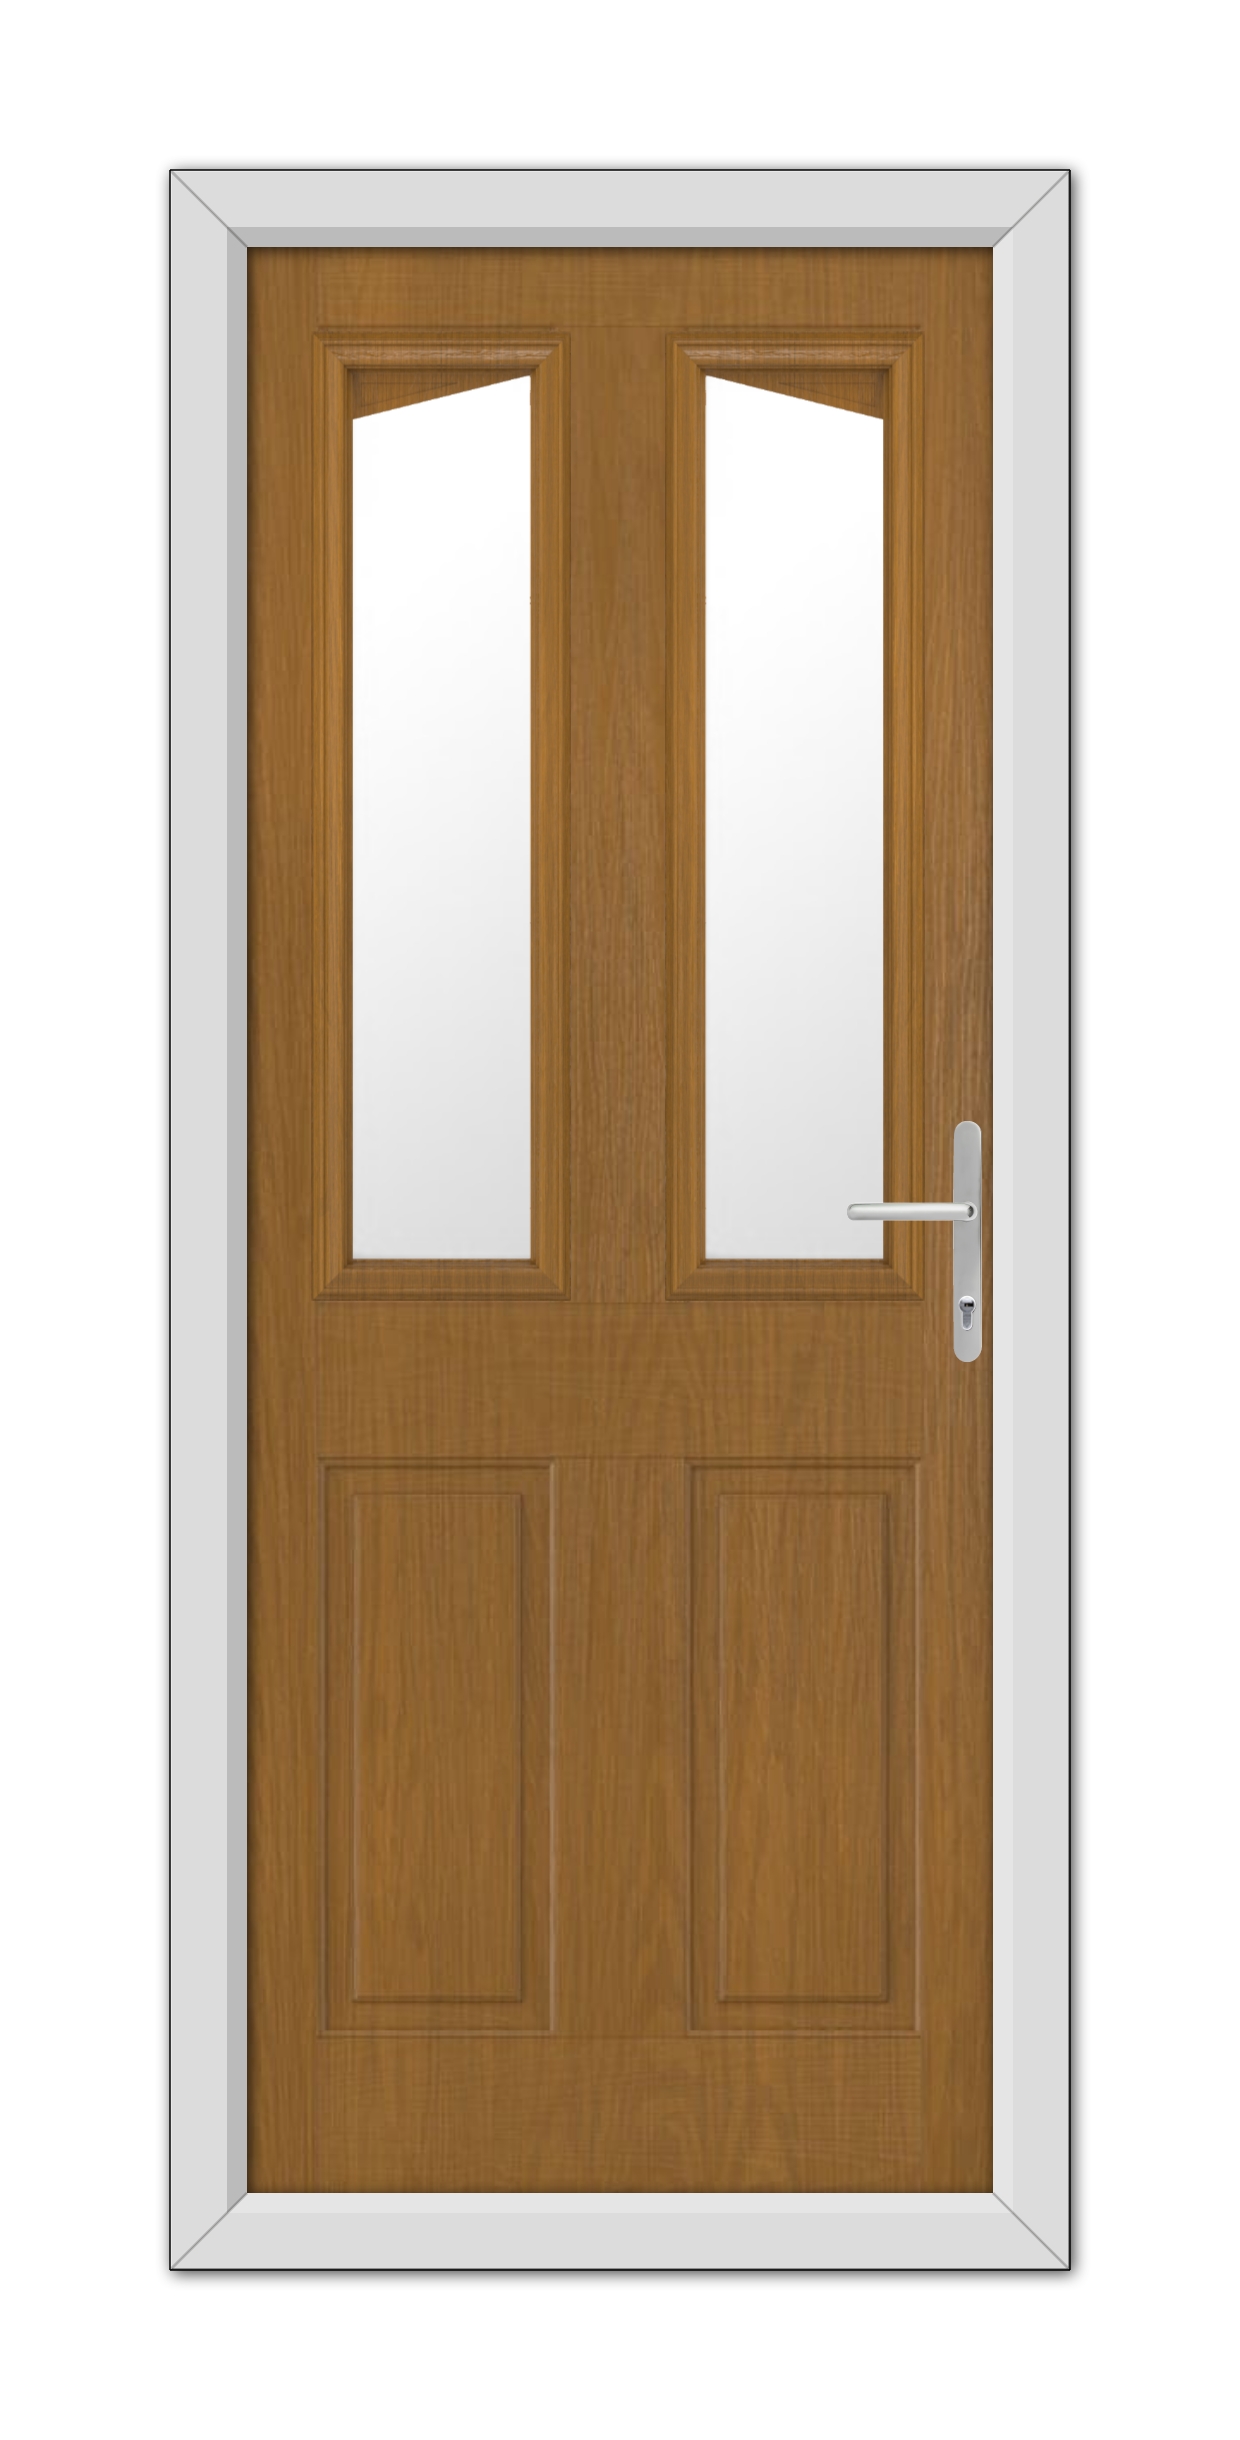 A Oak Highbury Composite Door 48mm Timber Core with glass panels on the top half and a metallic handle on the right, set in a white frame.